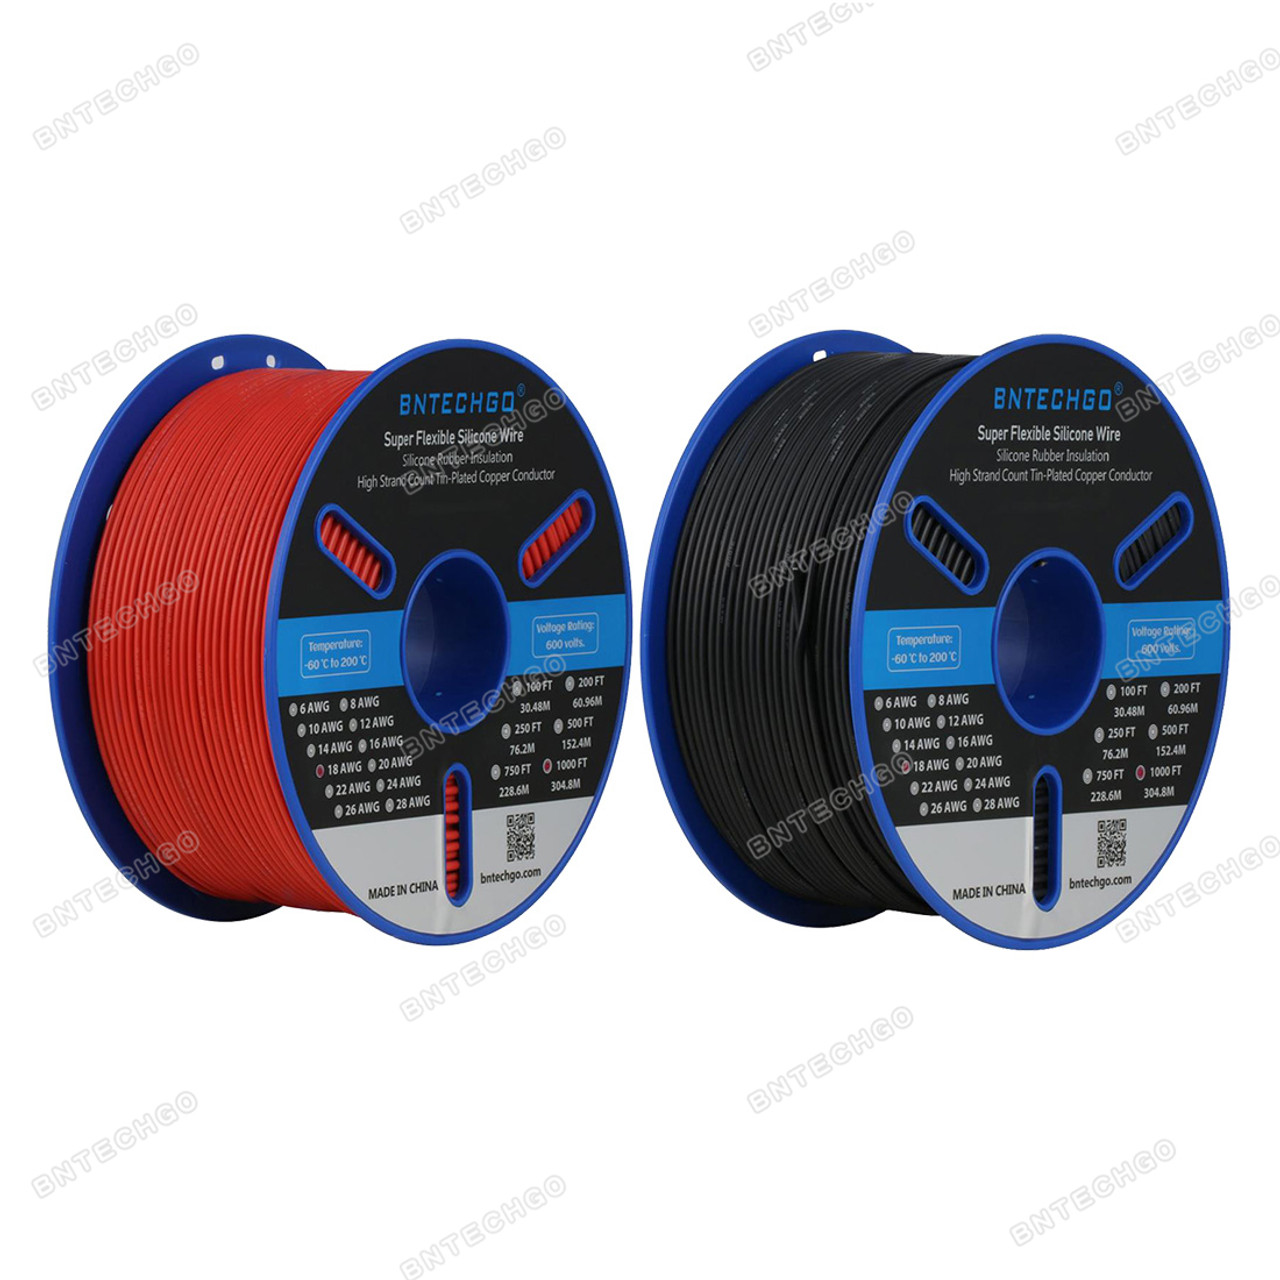 BNTECHGO 18 Gauge Silicone Wire 10 ft Red and 10 ft Black Flexible 18 AWG Stranded Tinned Copper Wire